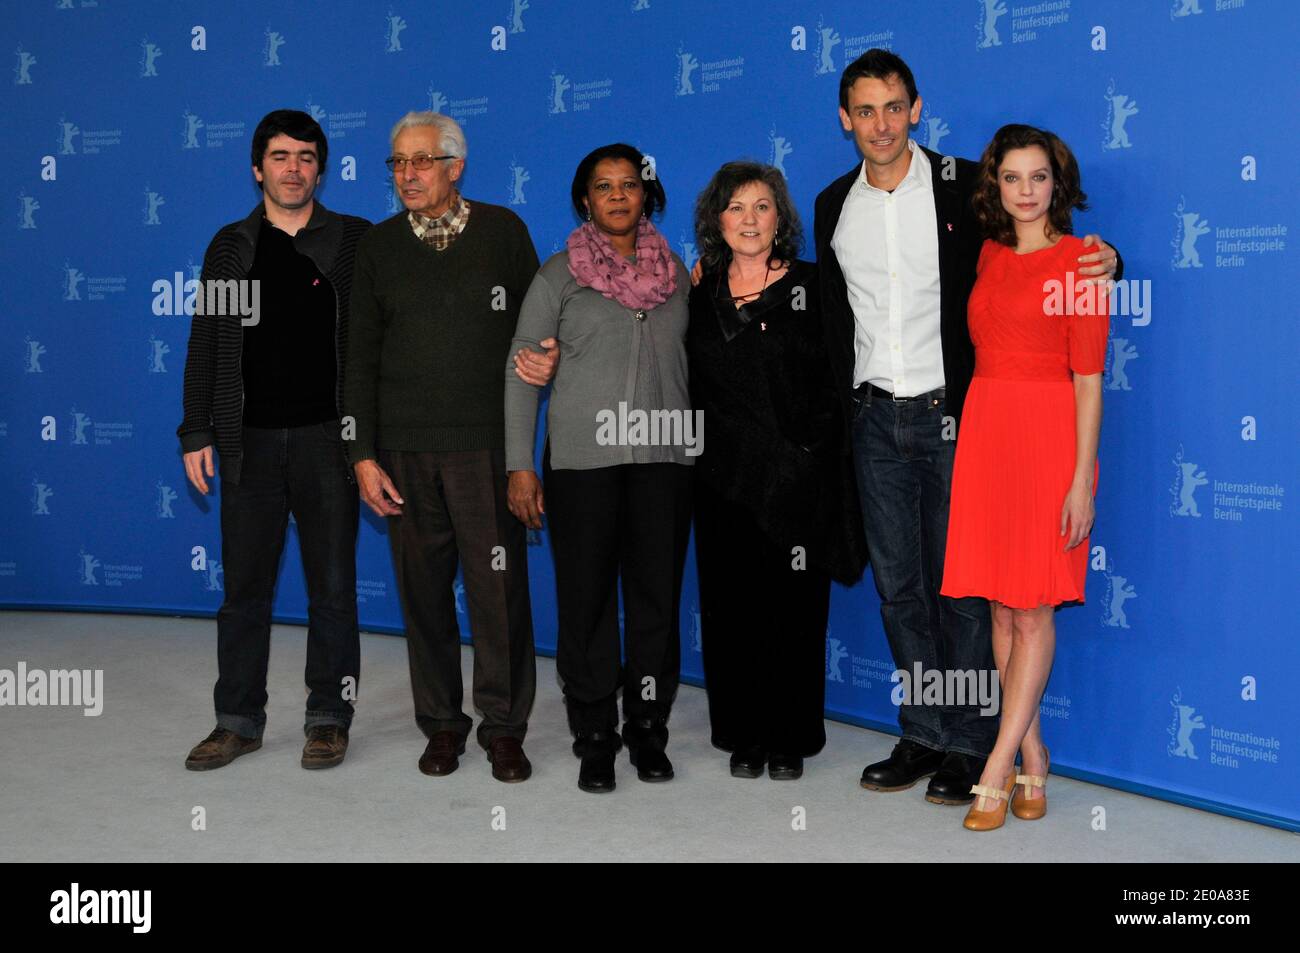 Actor Ivo Mueller, director of photography Rui Pocas, producer Luis Urbano, director Miguel Gomes, actress Teresa Madruga, and actress Ana Moreira attend the 'Tabu' photocall for the 62nd Berlin International Film Festival, in Berlin, Germany, 14 February 2012. The 62nd Berlinale takes place from 09 to 19 February. Photo by Aurore Marechal/ABACAPRESS.COM Stock Photo